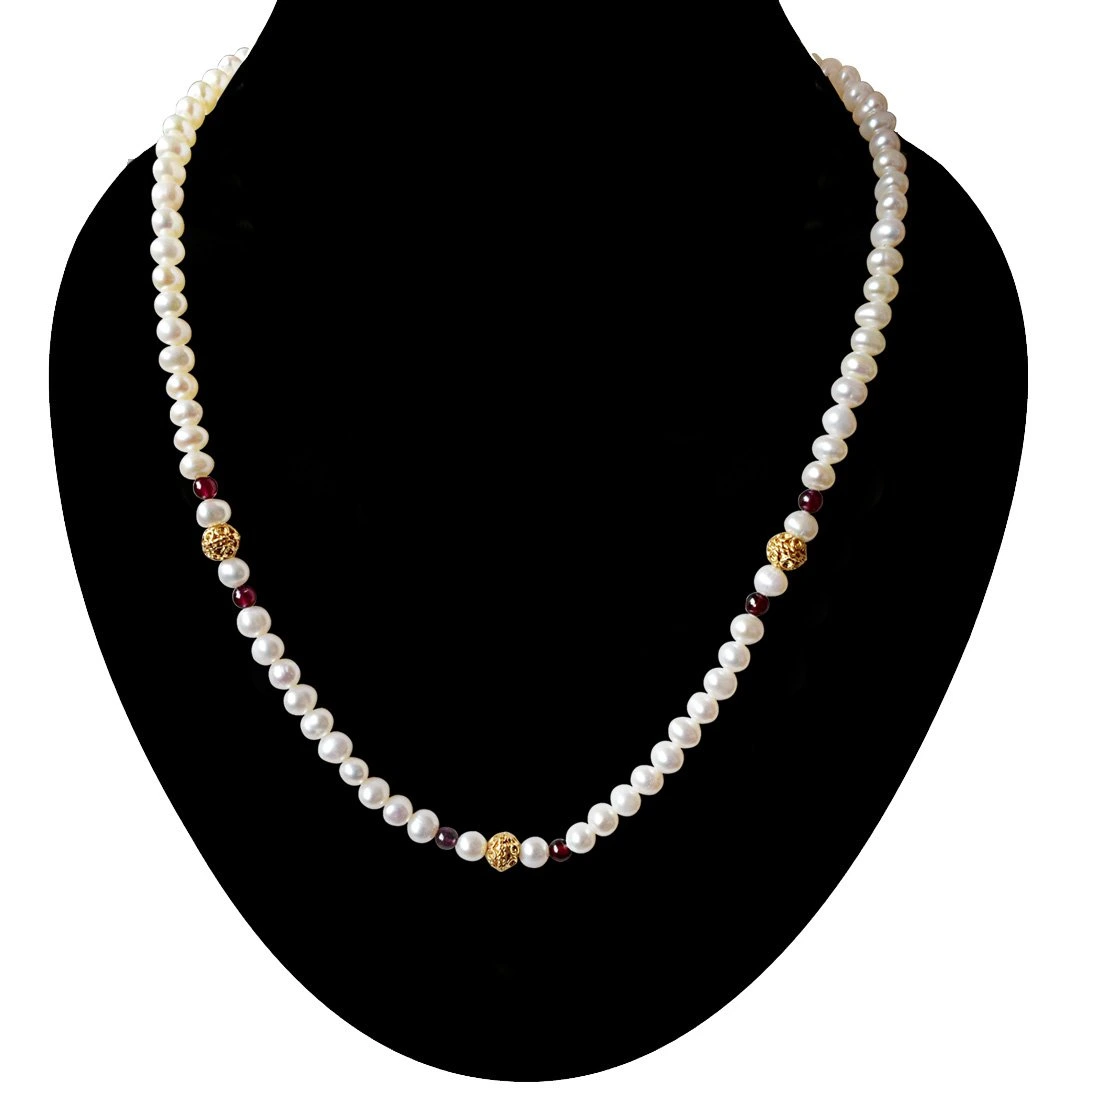 Dejavu - Single Line Red Garnet, Real Freshwater Pearl and Gold Plated Ball Necklace for Women (SN33)